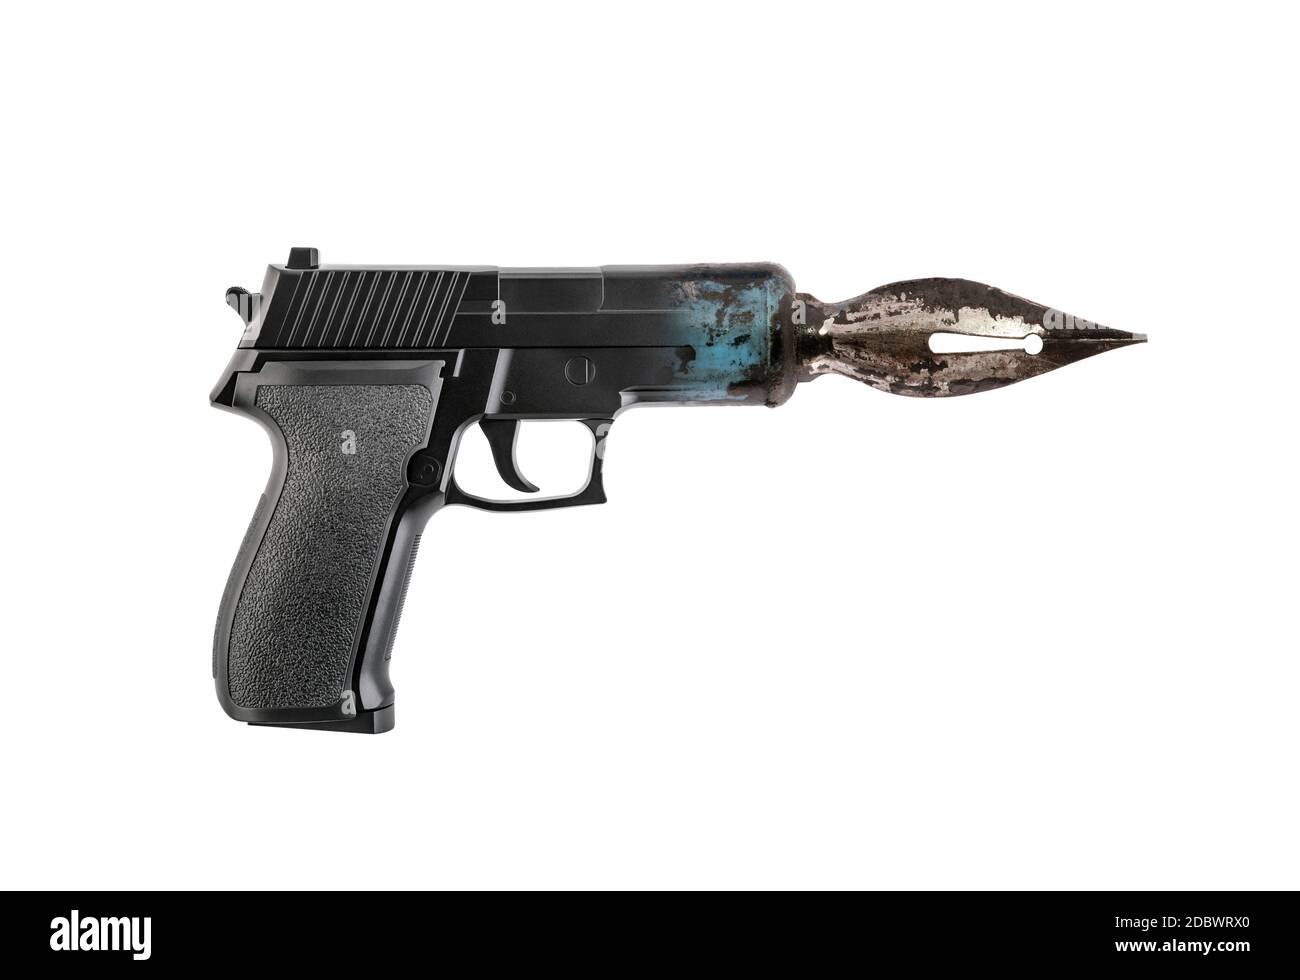 Gun Pen High Resolution Stock Photography and Images - Alamy